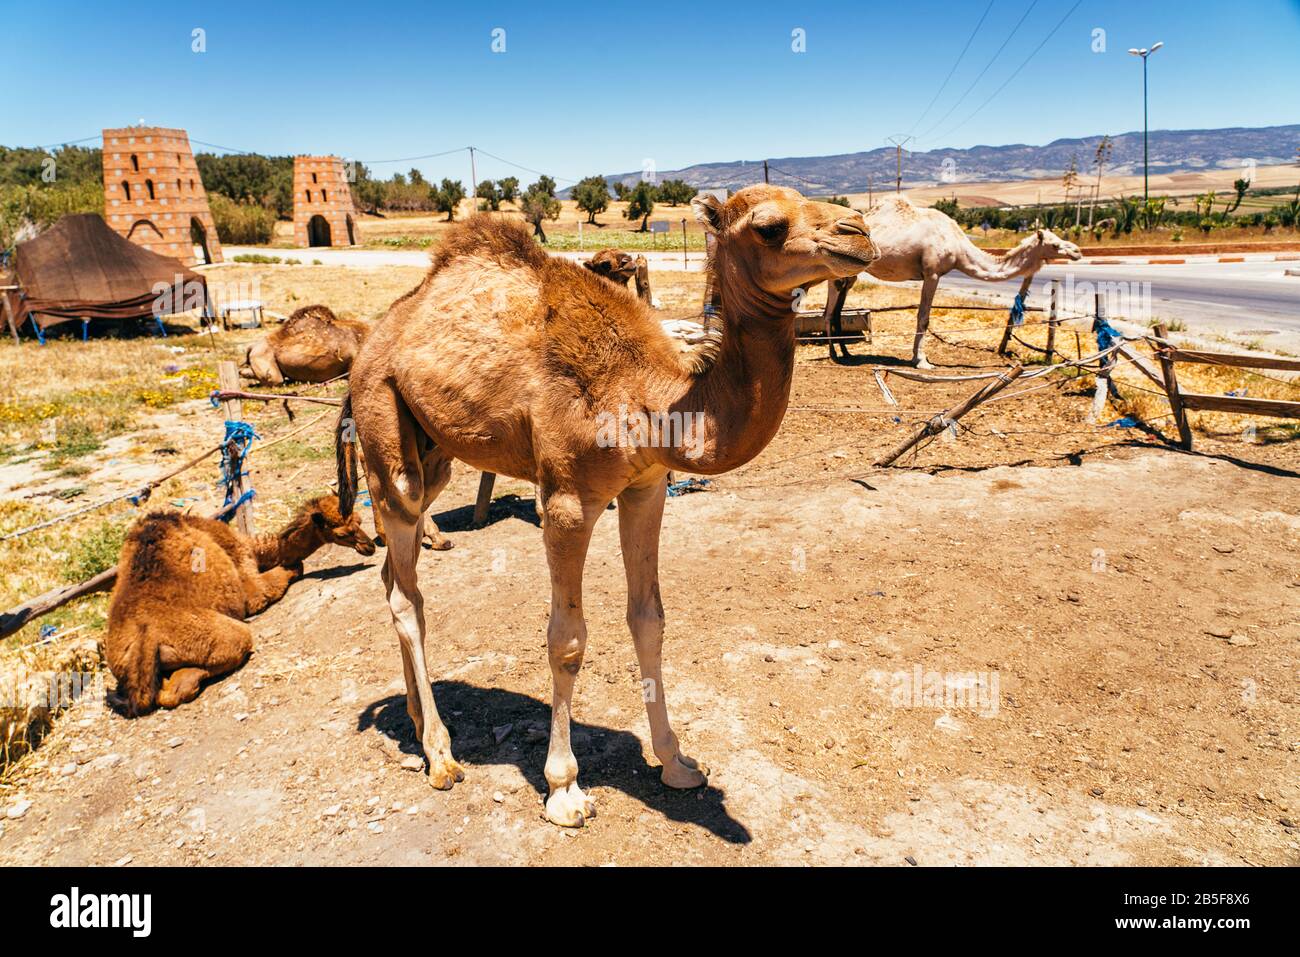 Camel and dromedary in Mequinenza, near Fez, Morocco. Stock Photo